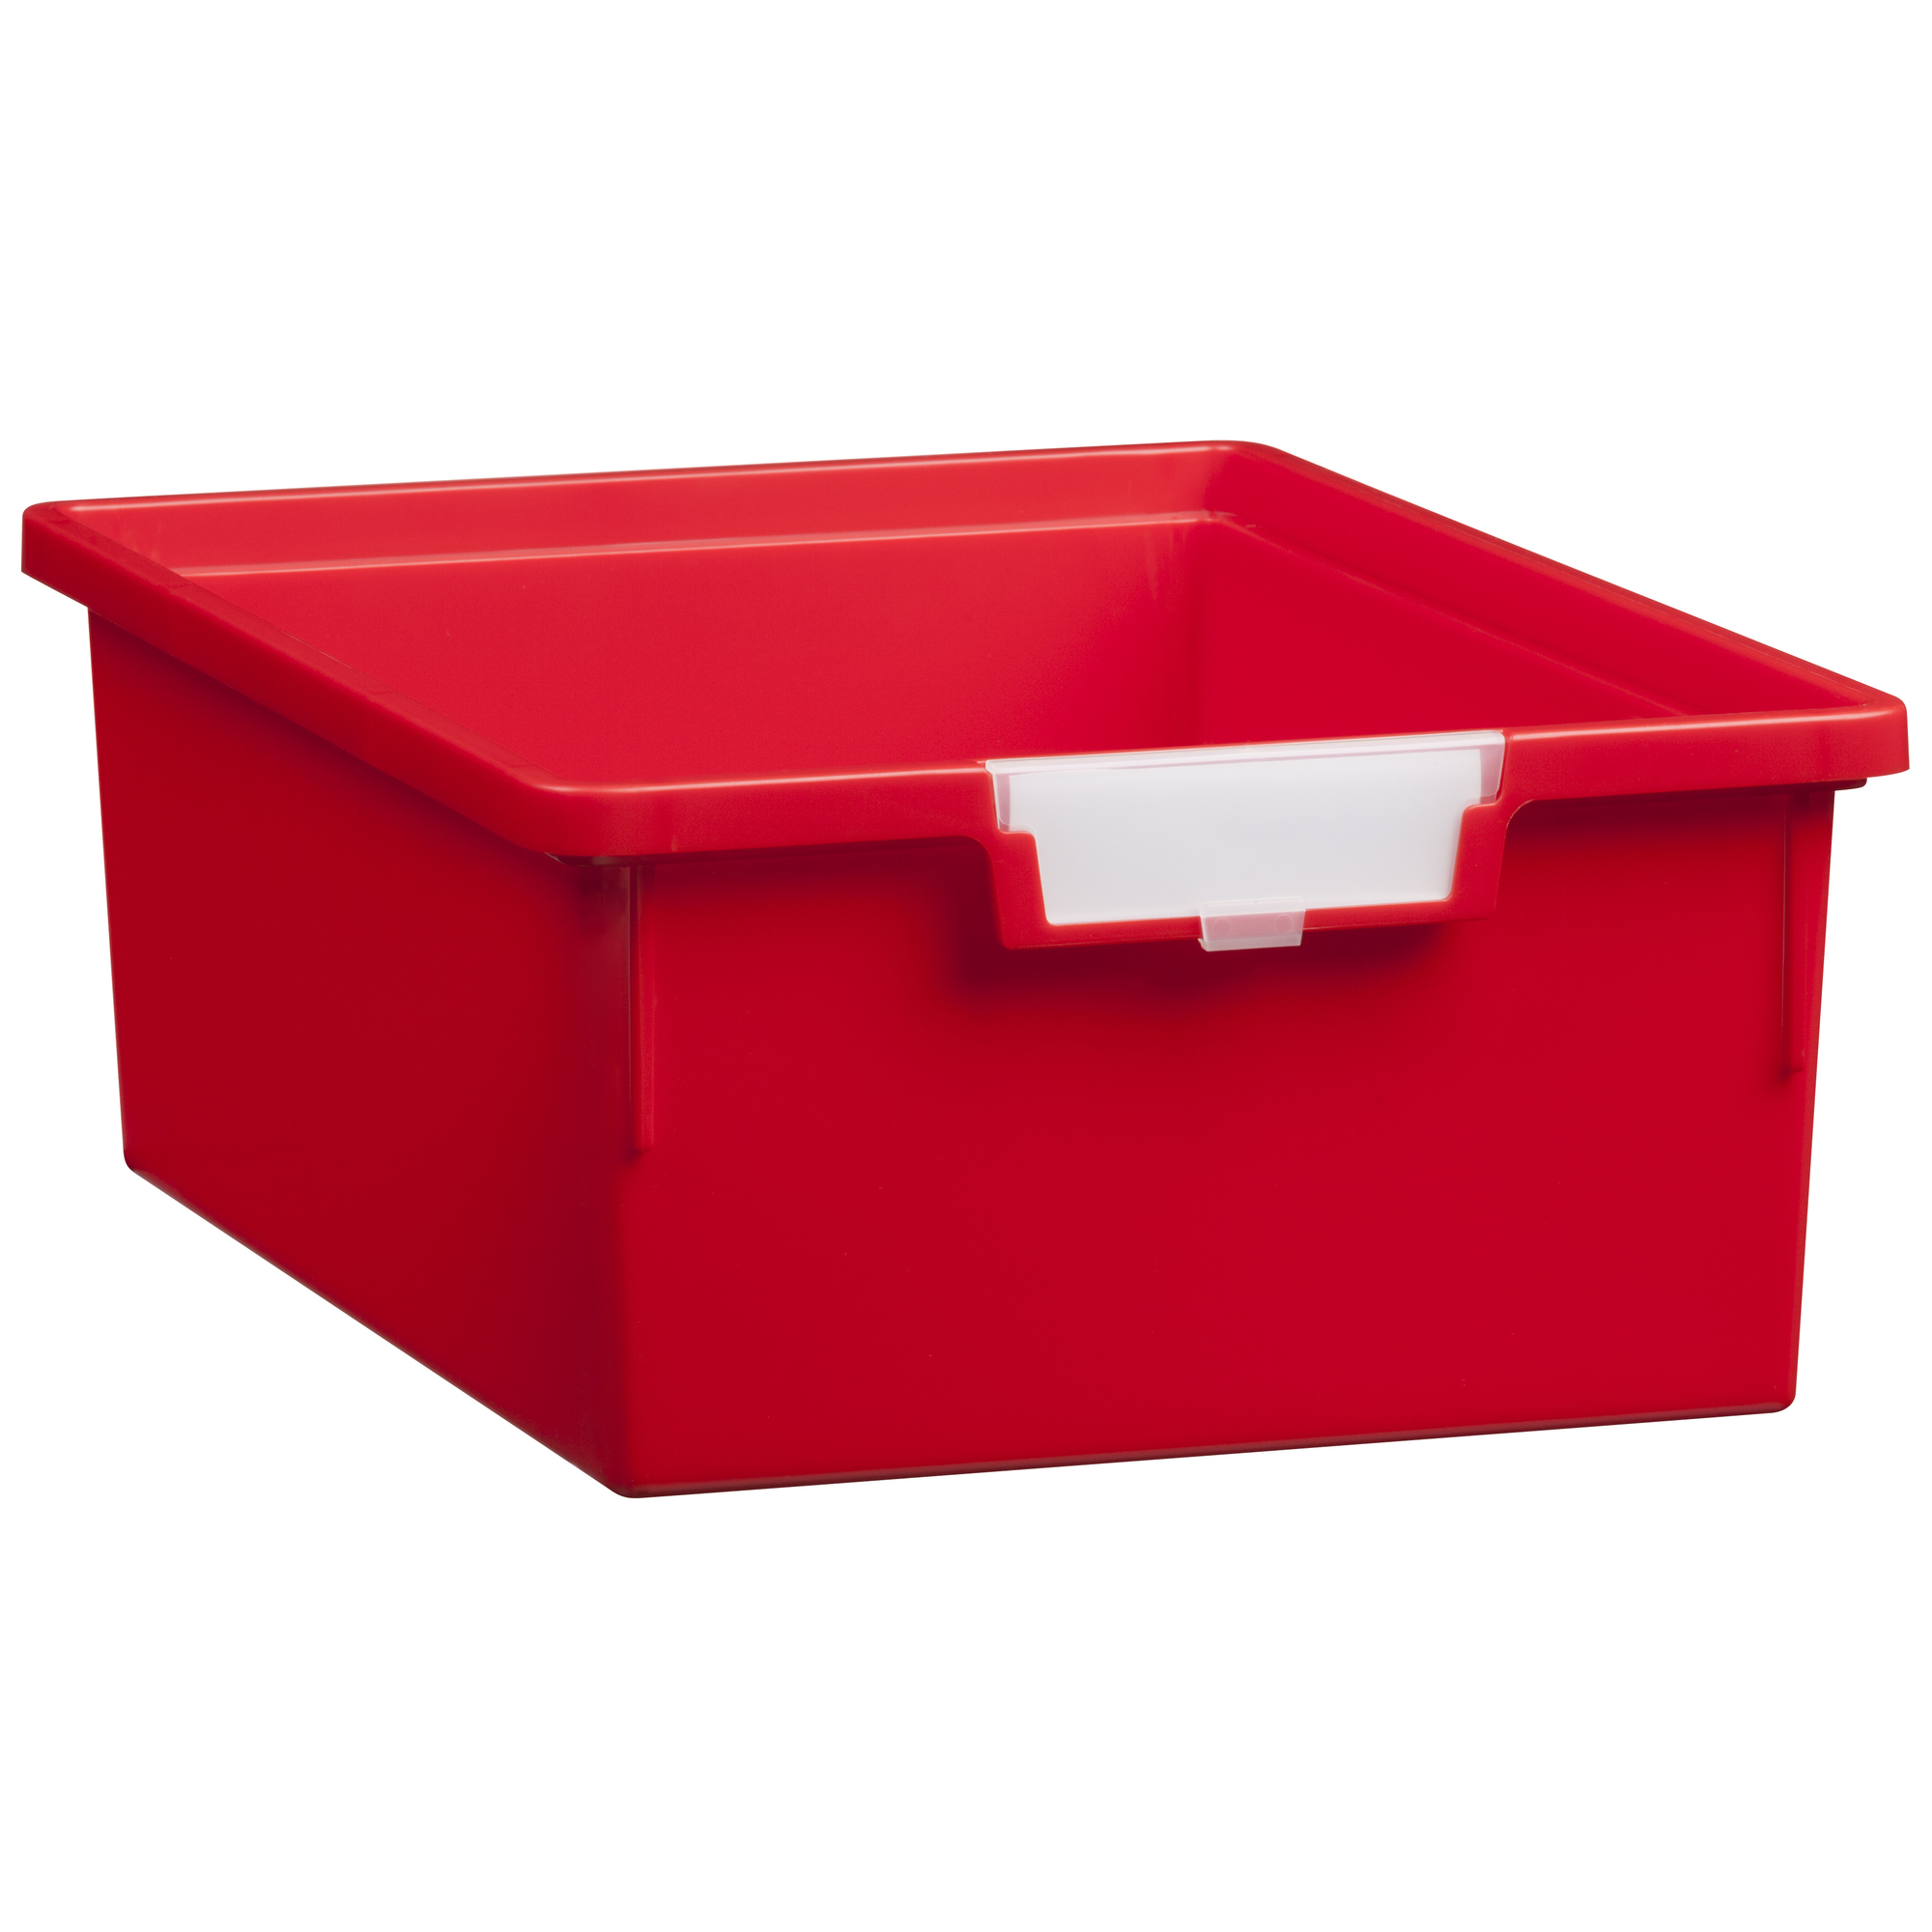 Certwood StorWerks, Slim Line 6Inch Tray in Primary Red-1PK, Included (qty.) 1 Height 6 in, Model CE1952PR1